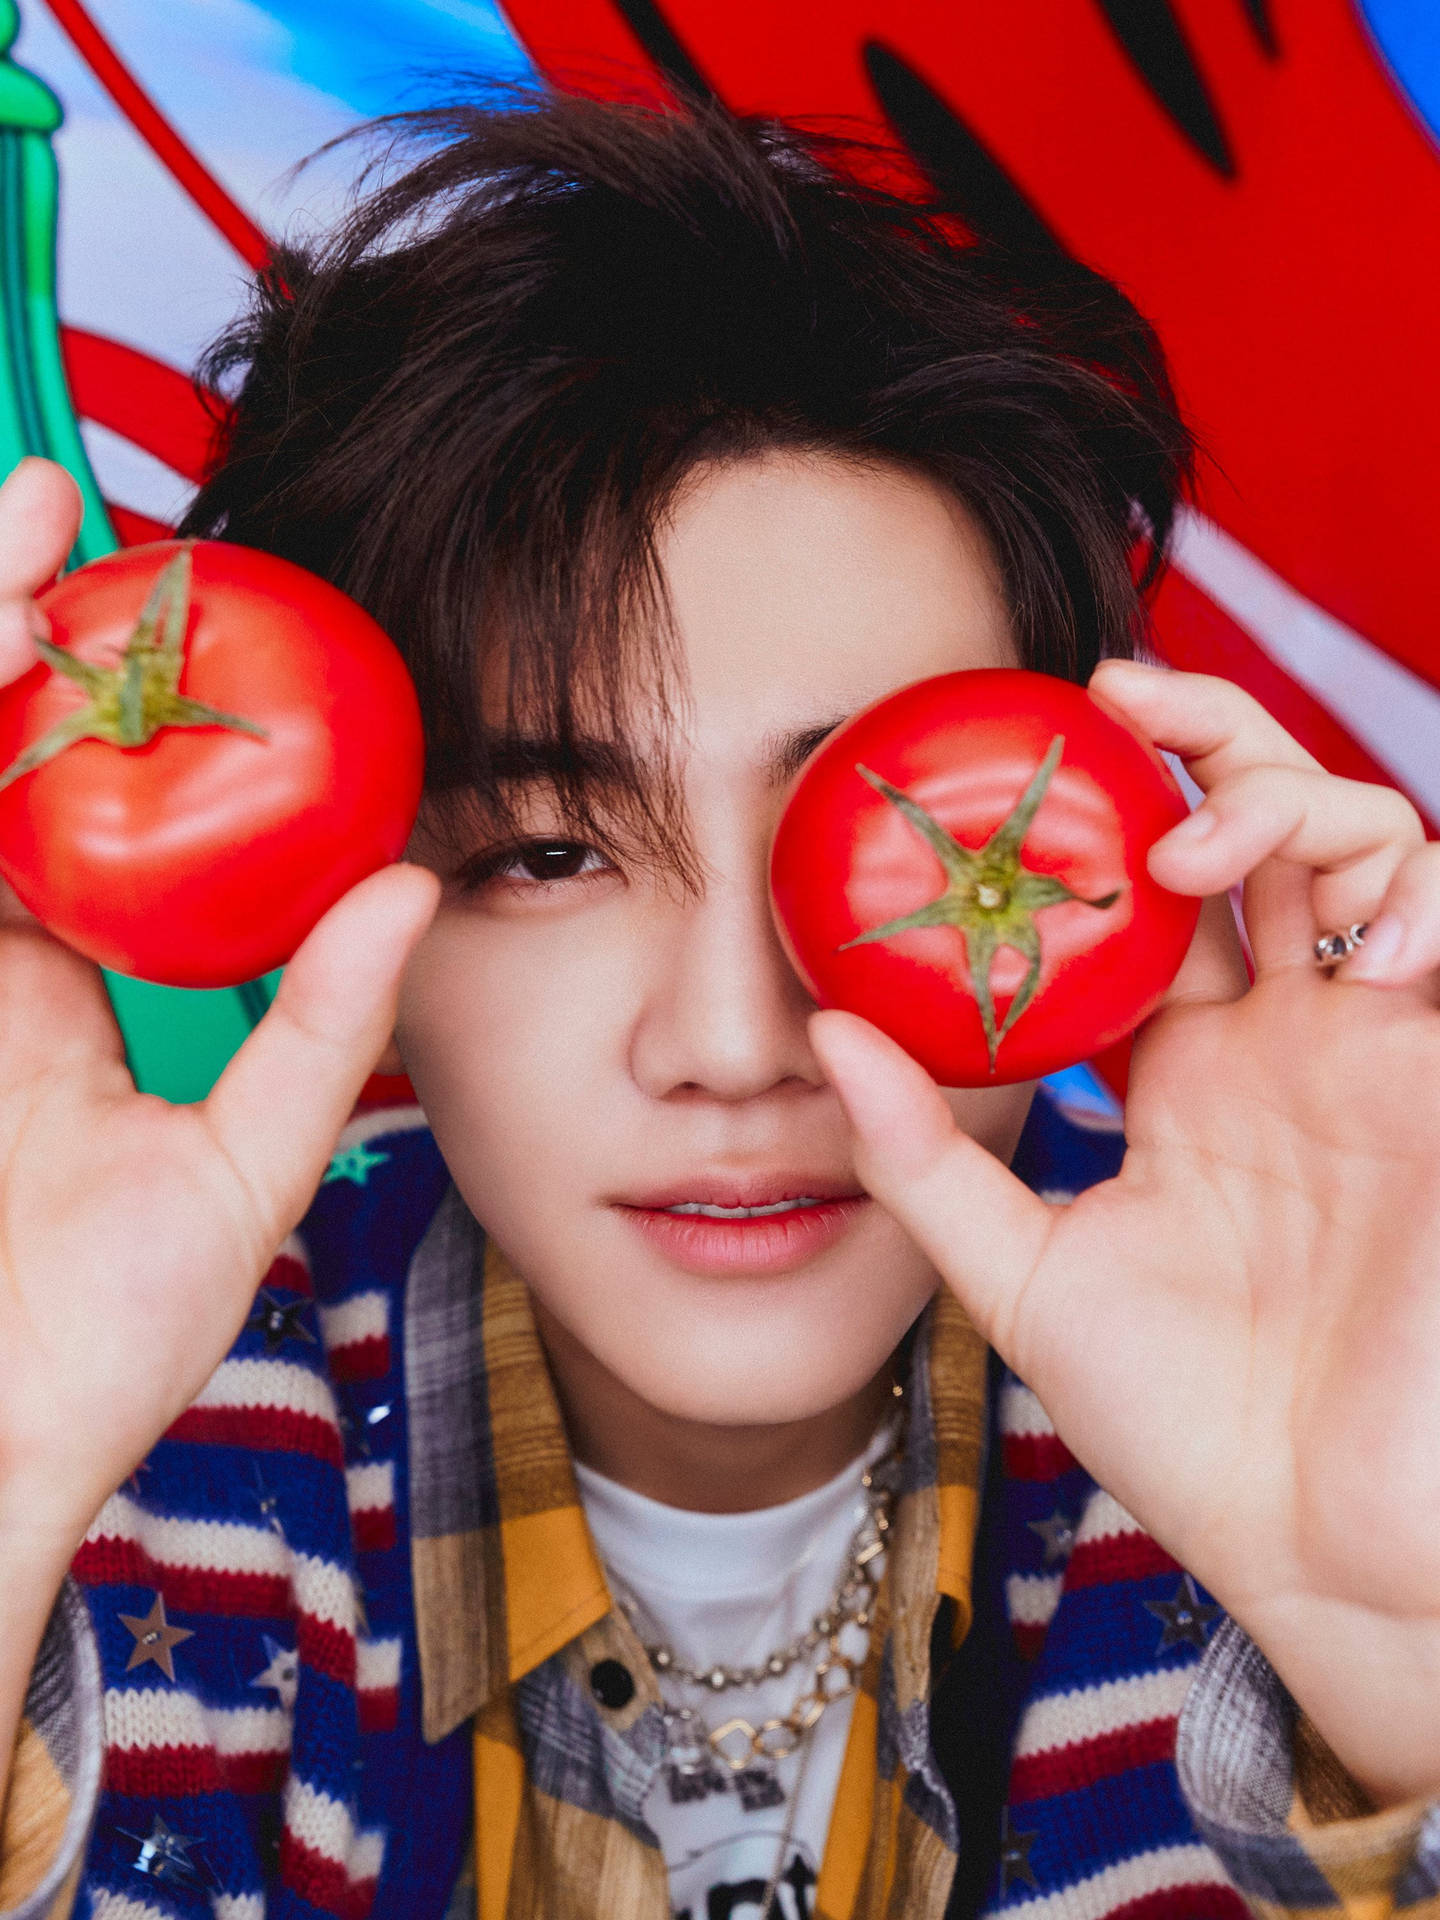 Jaemin Nct With Tomatoes Background